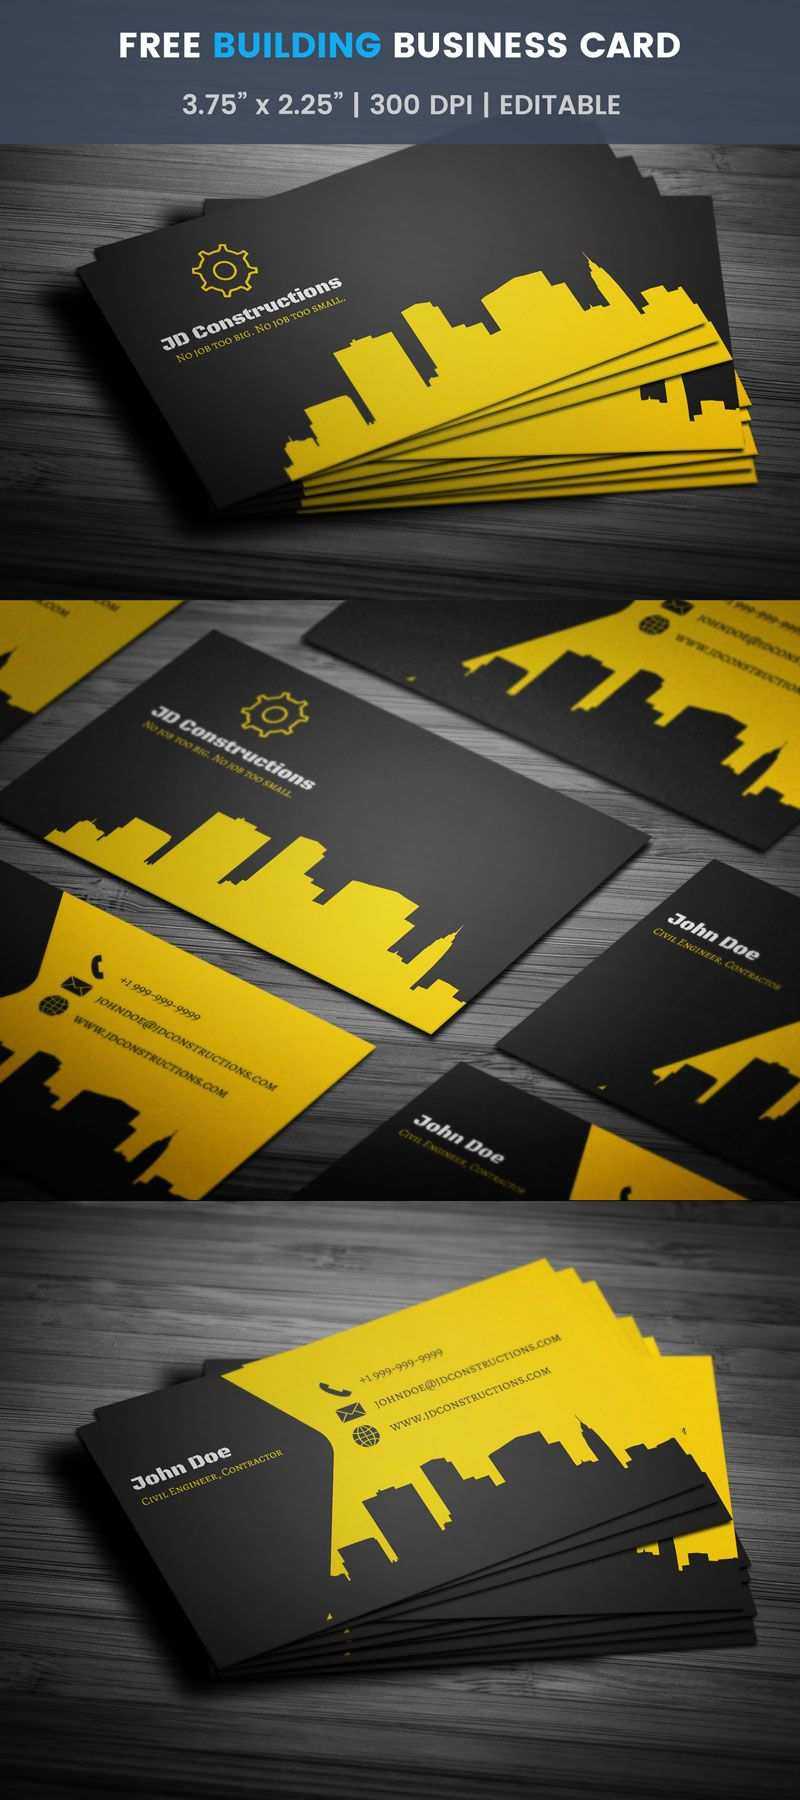 90 Blank Construction Business Card Templates Download Free Throughout Construction Business Card Templates Download Free